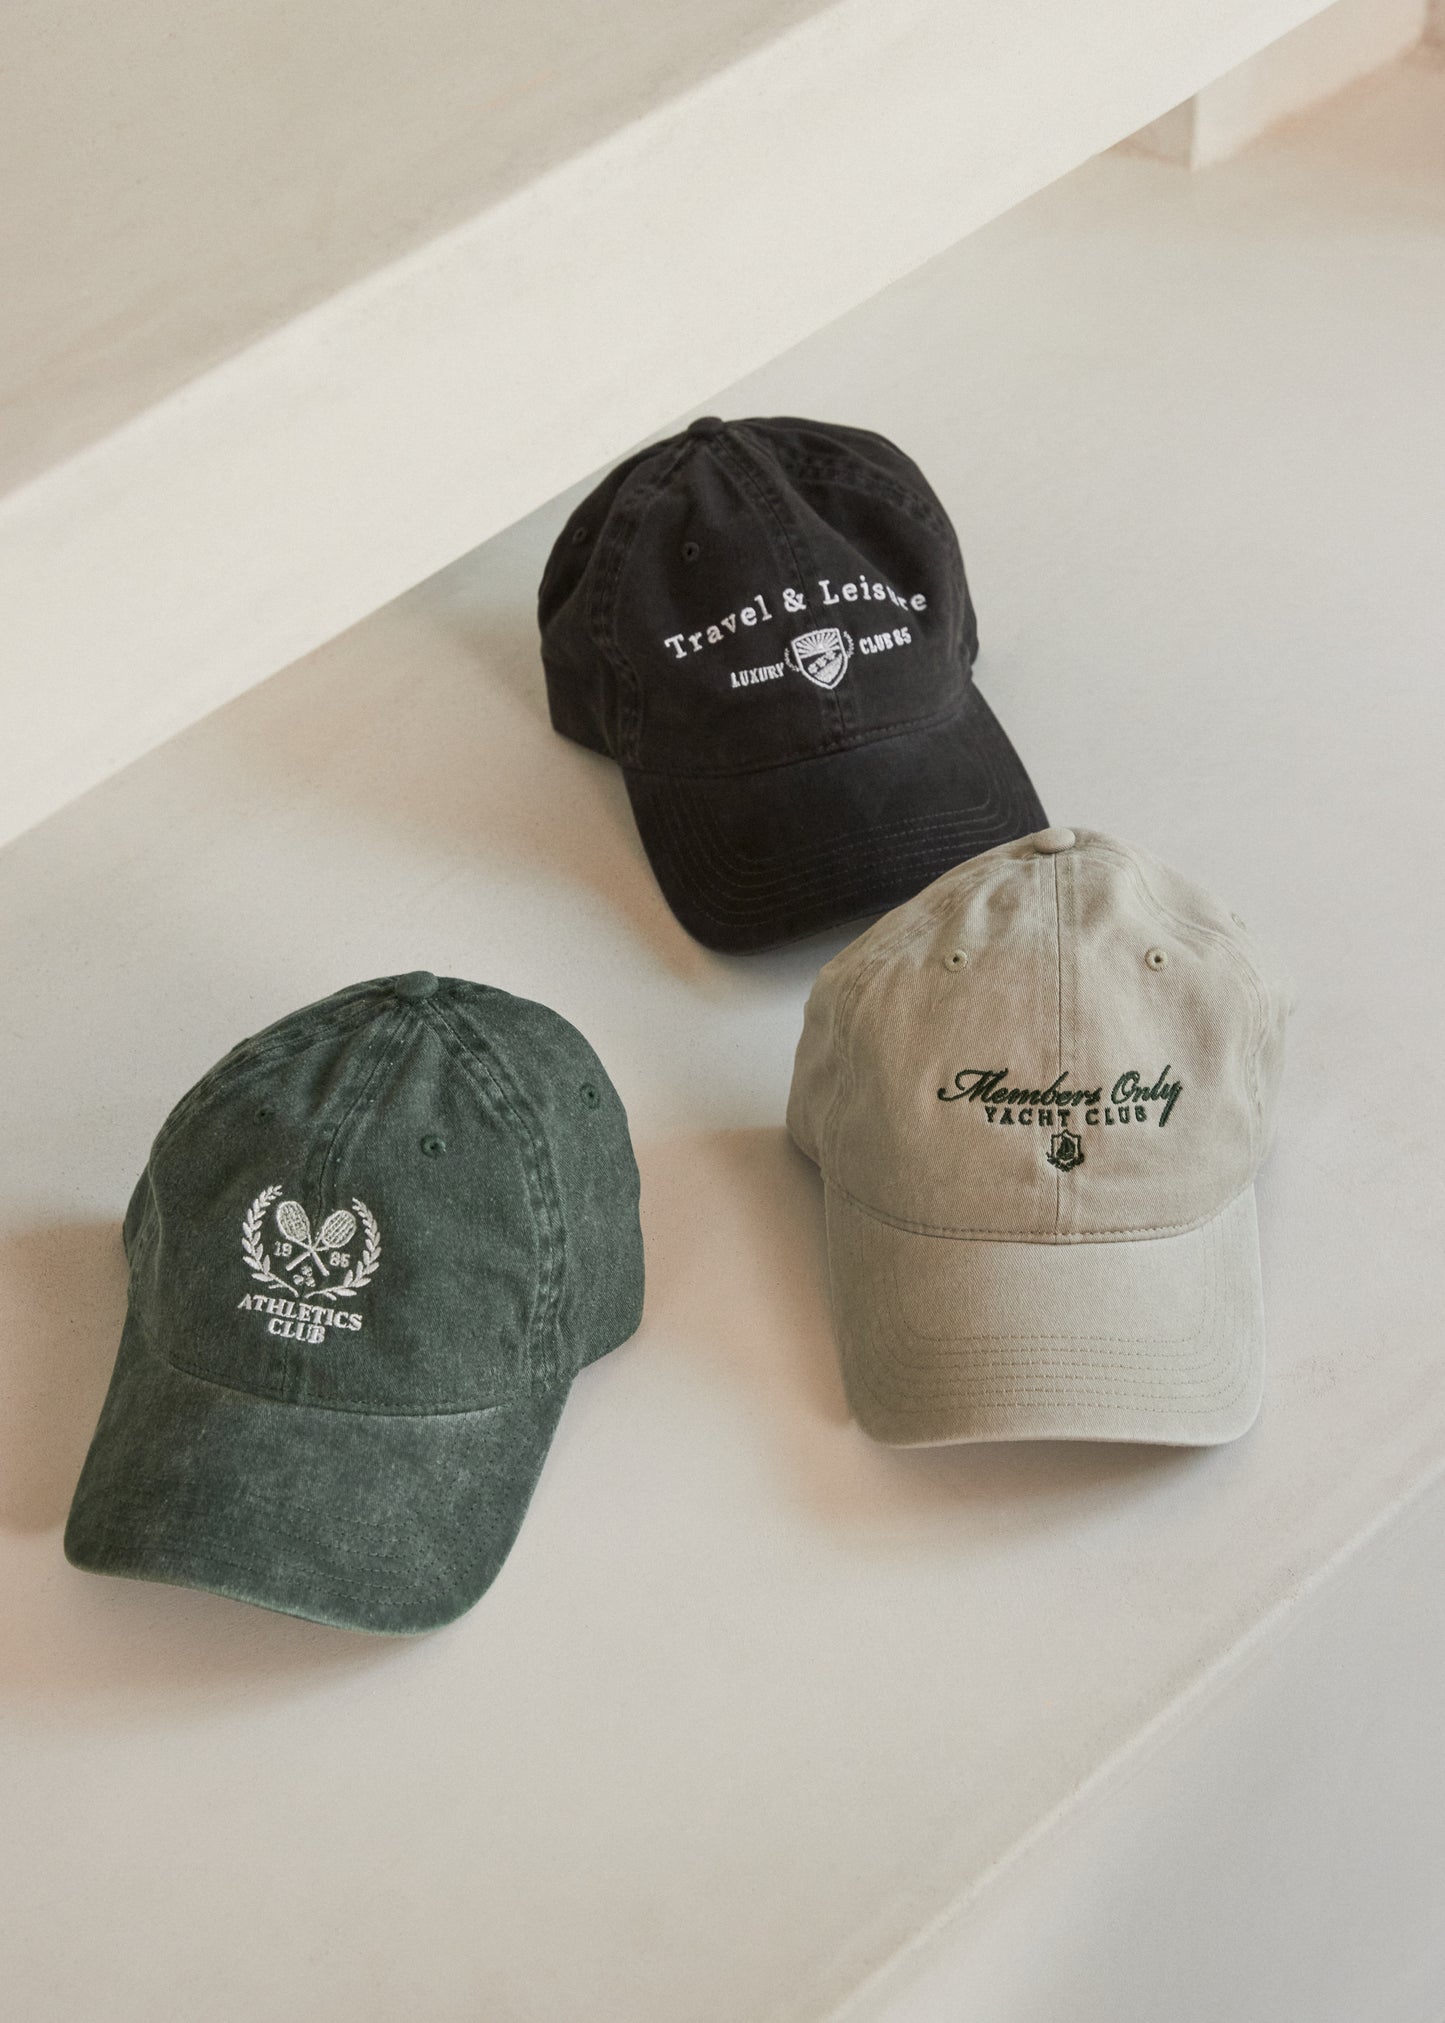 MEMBERS ONLY HAT